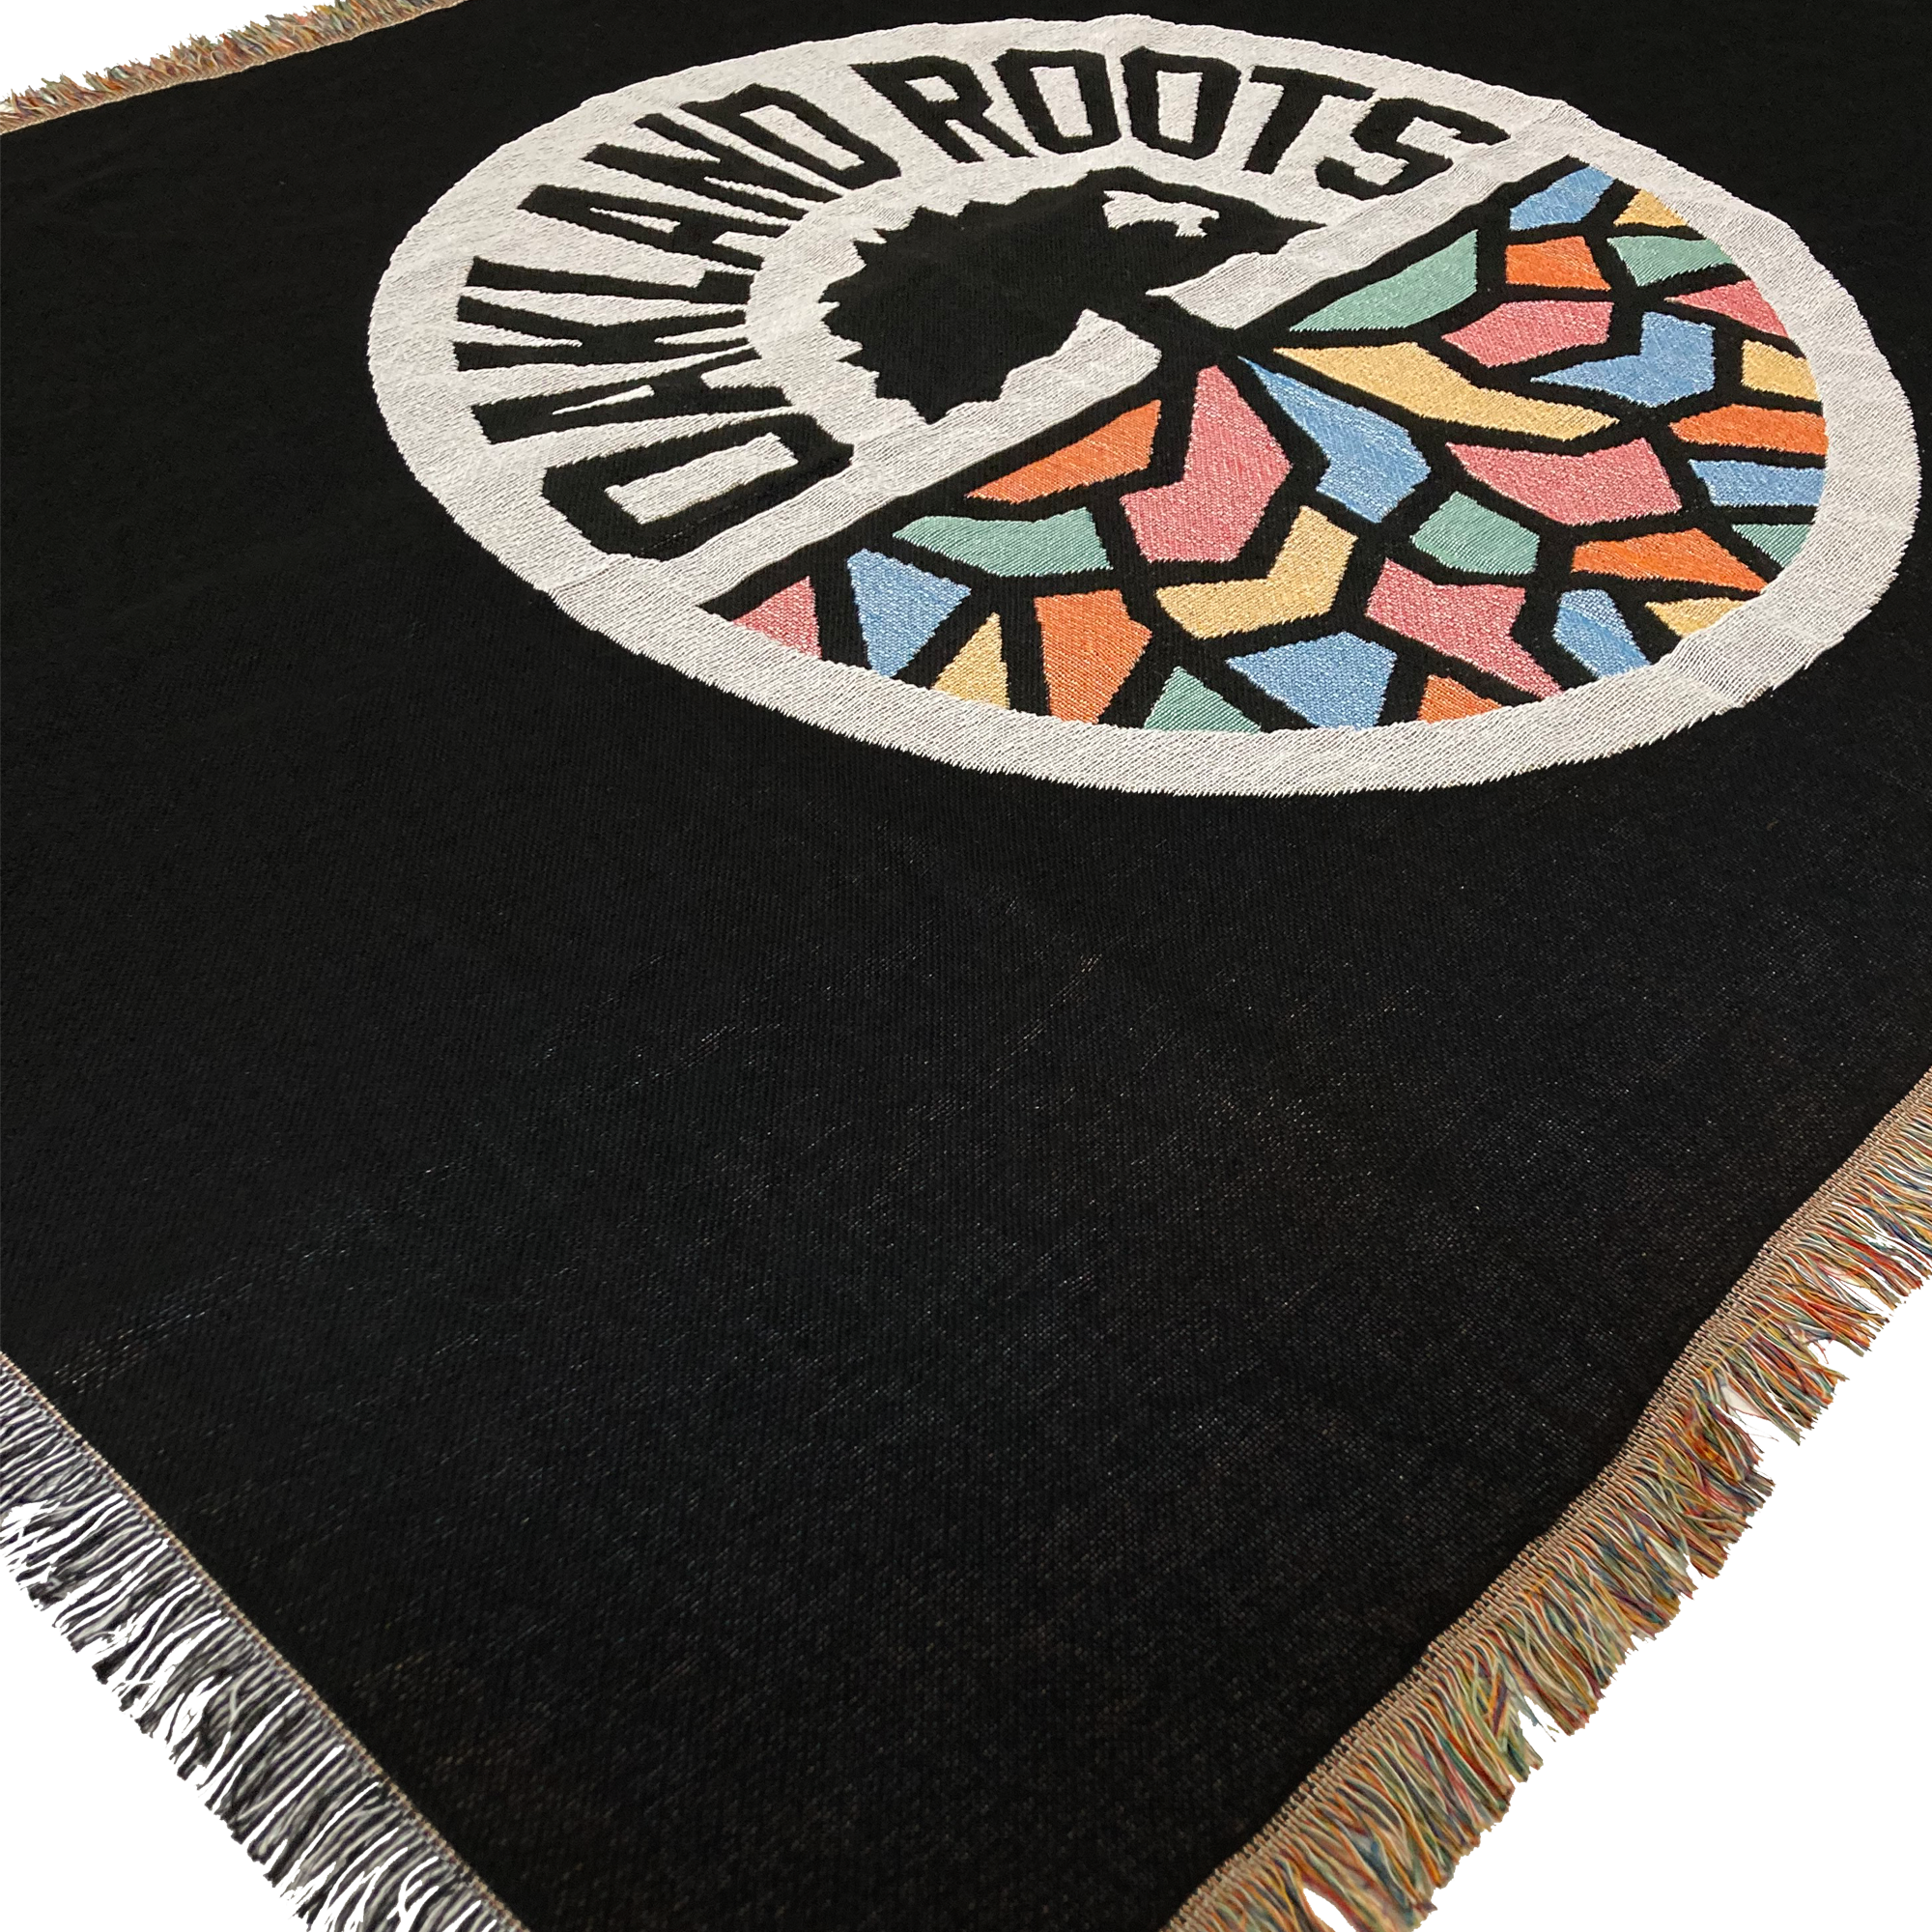 Detailed close-up of a black blanket with colored fringe and large full-color Oakland Roots SC circle logo in the center.